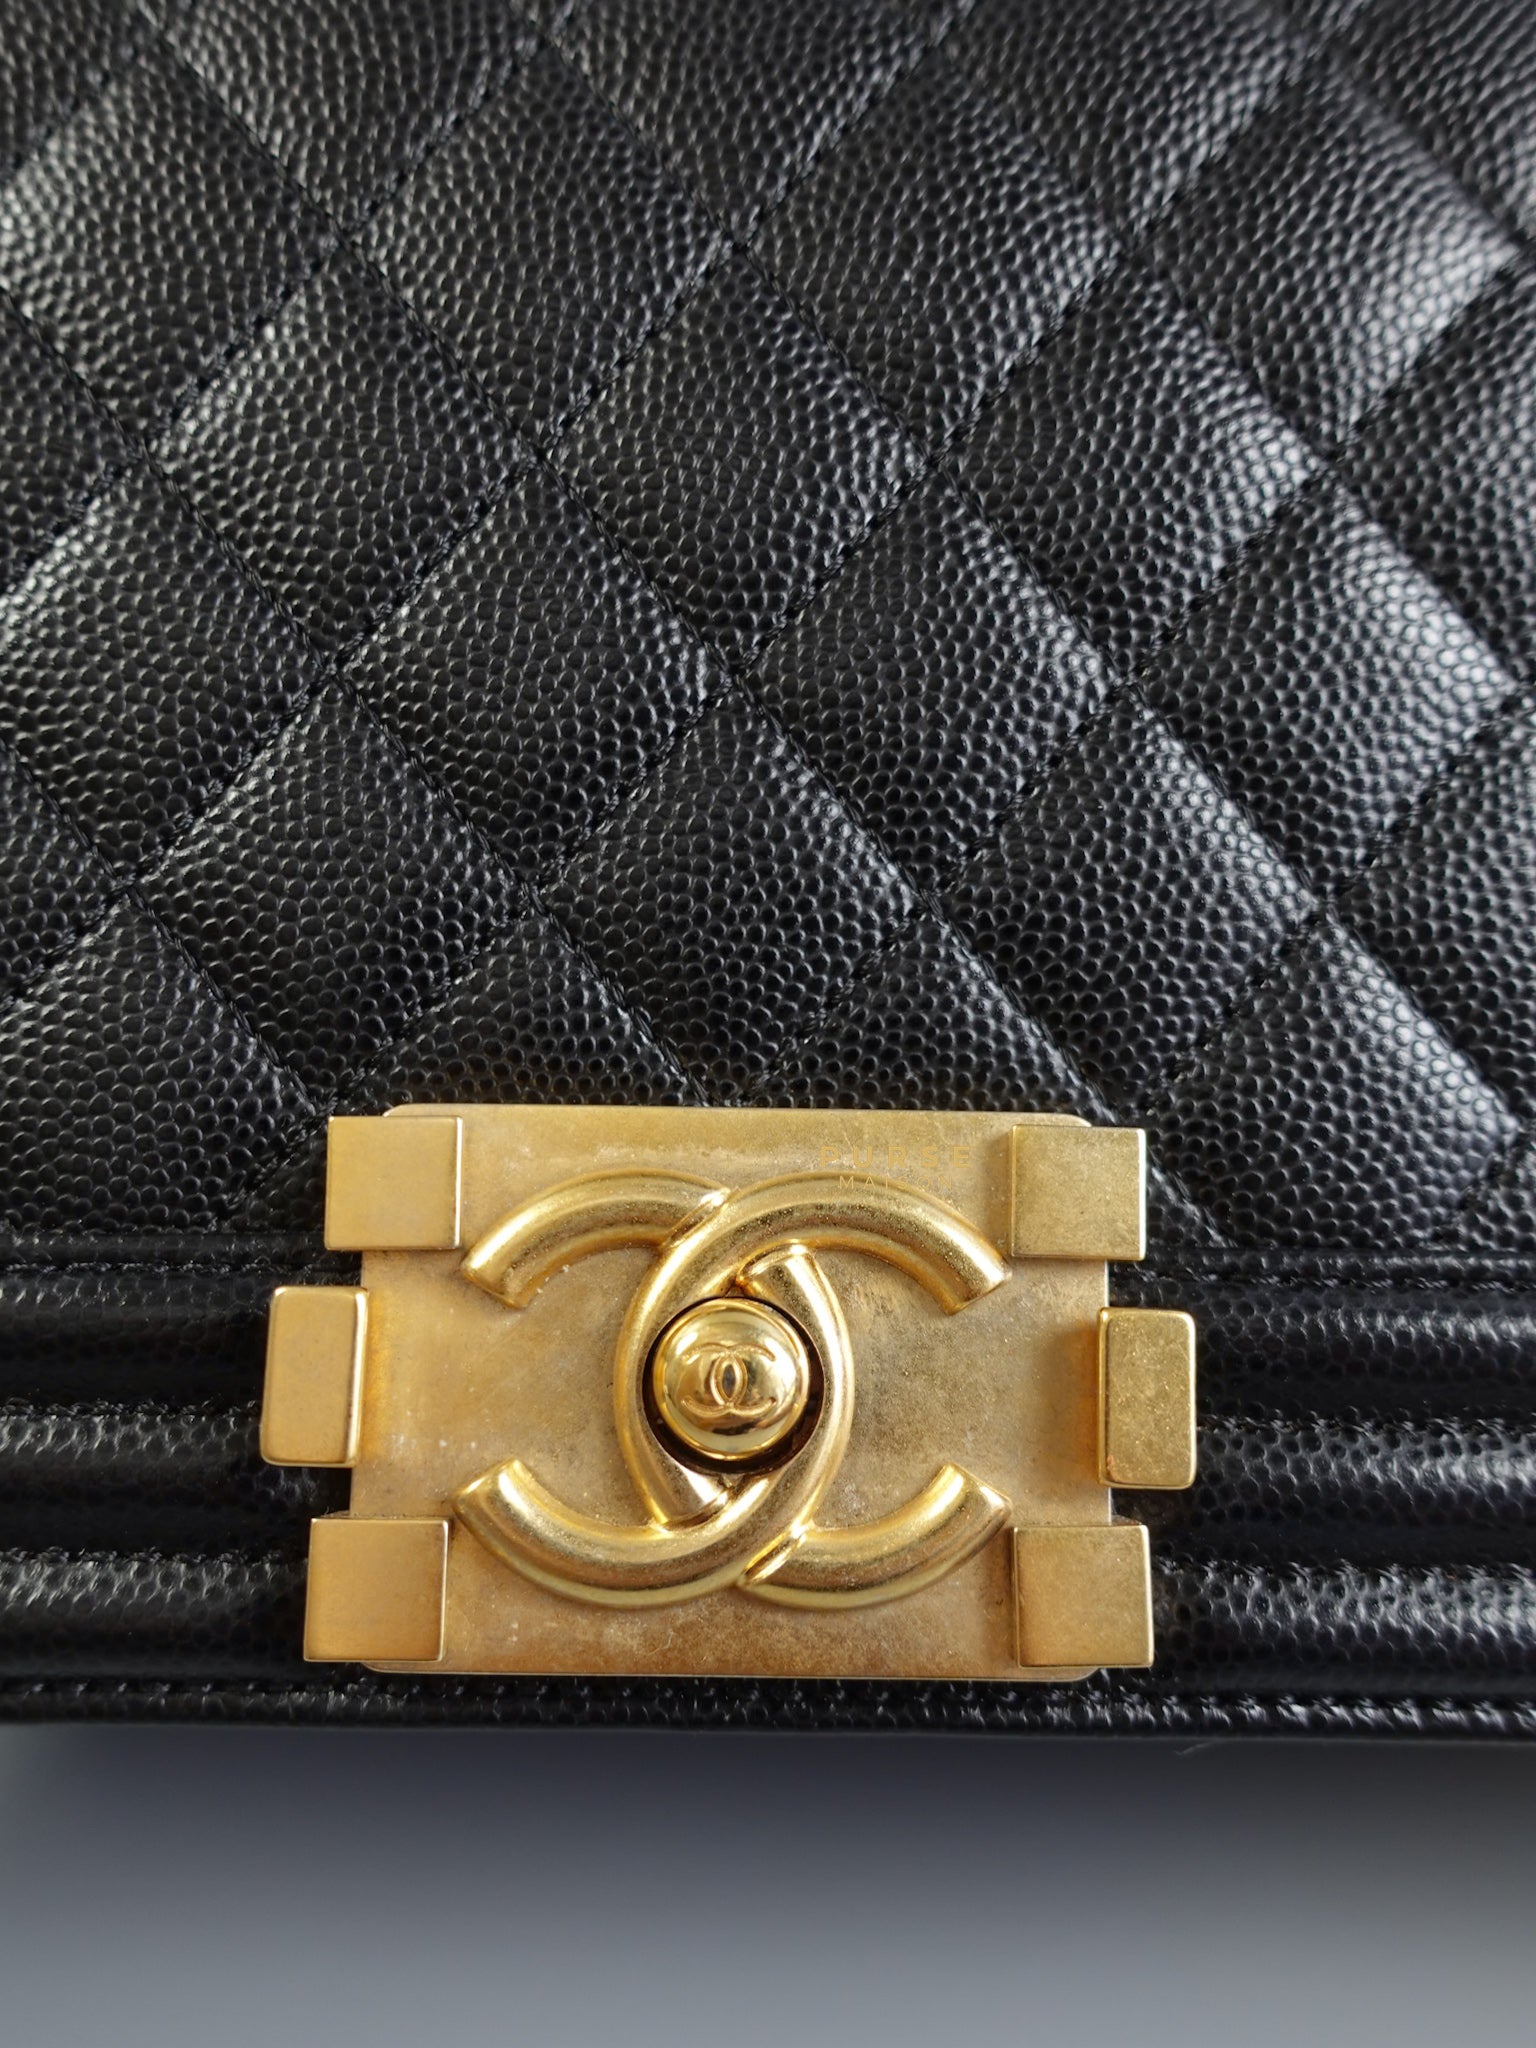 Le Boy Old Medium in Black Caviar Leather and Gold Hardware Seres 28 | Purse Maison Luxury Bags Shop